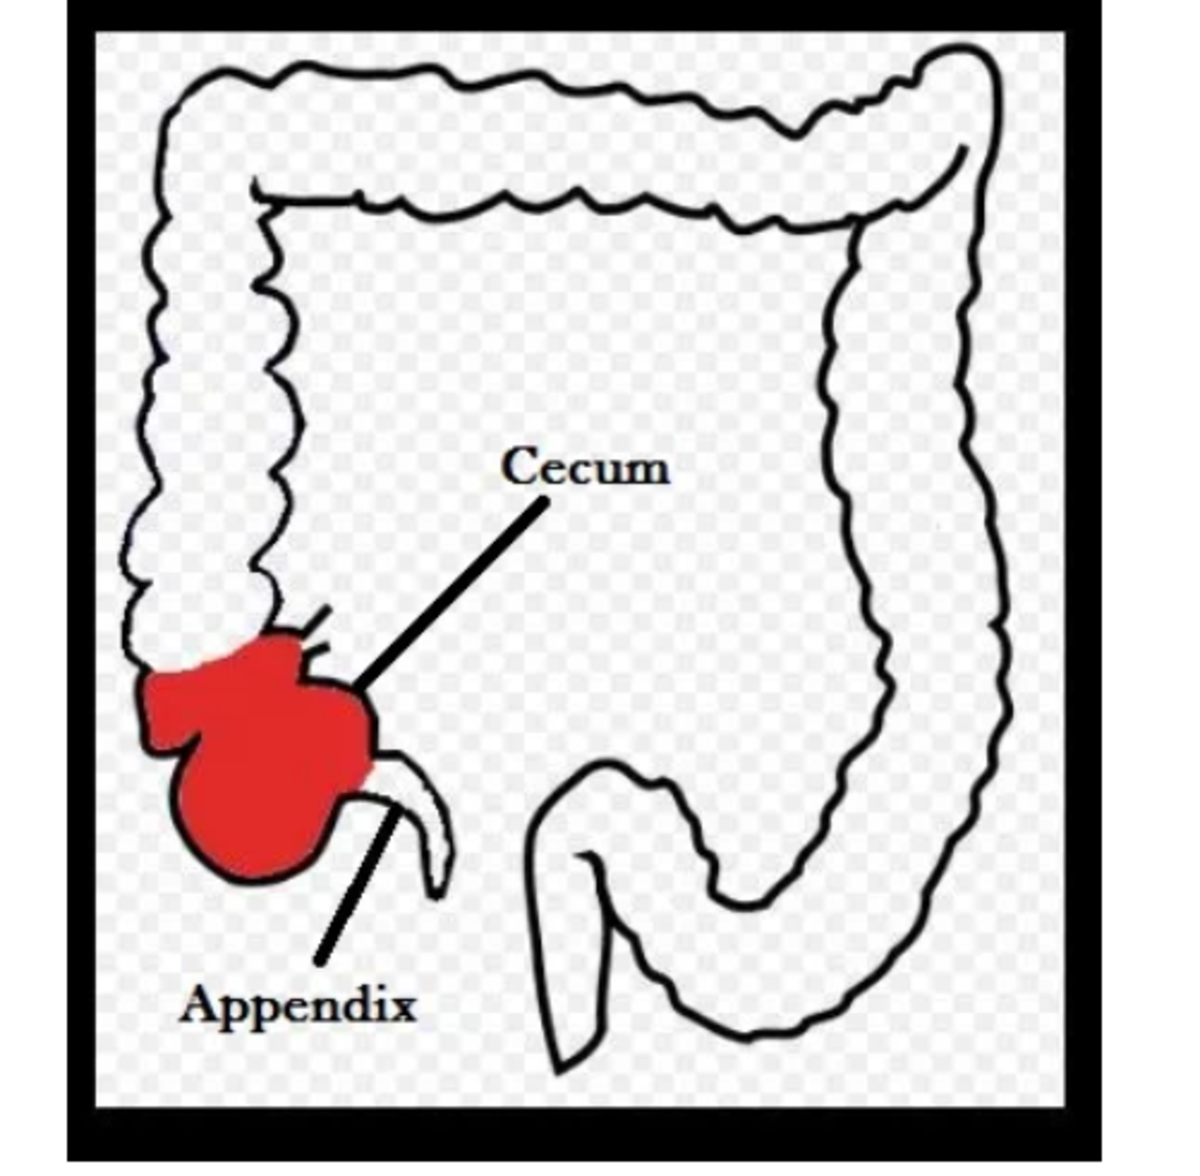 Dogs don't have an appendix, but they have the cecum